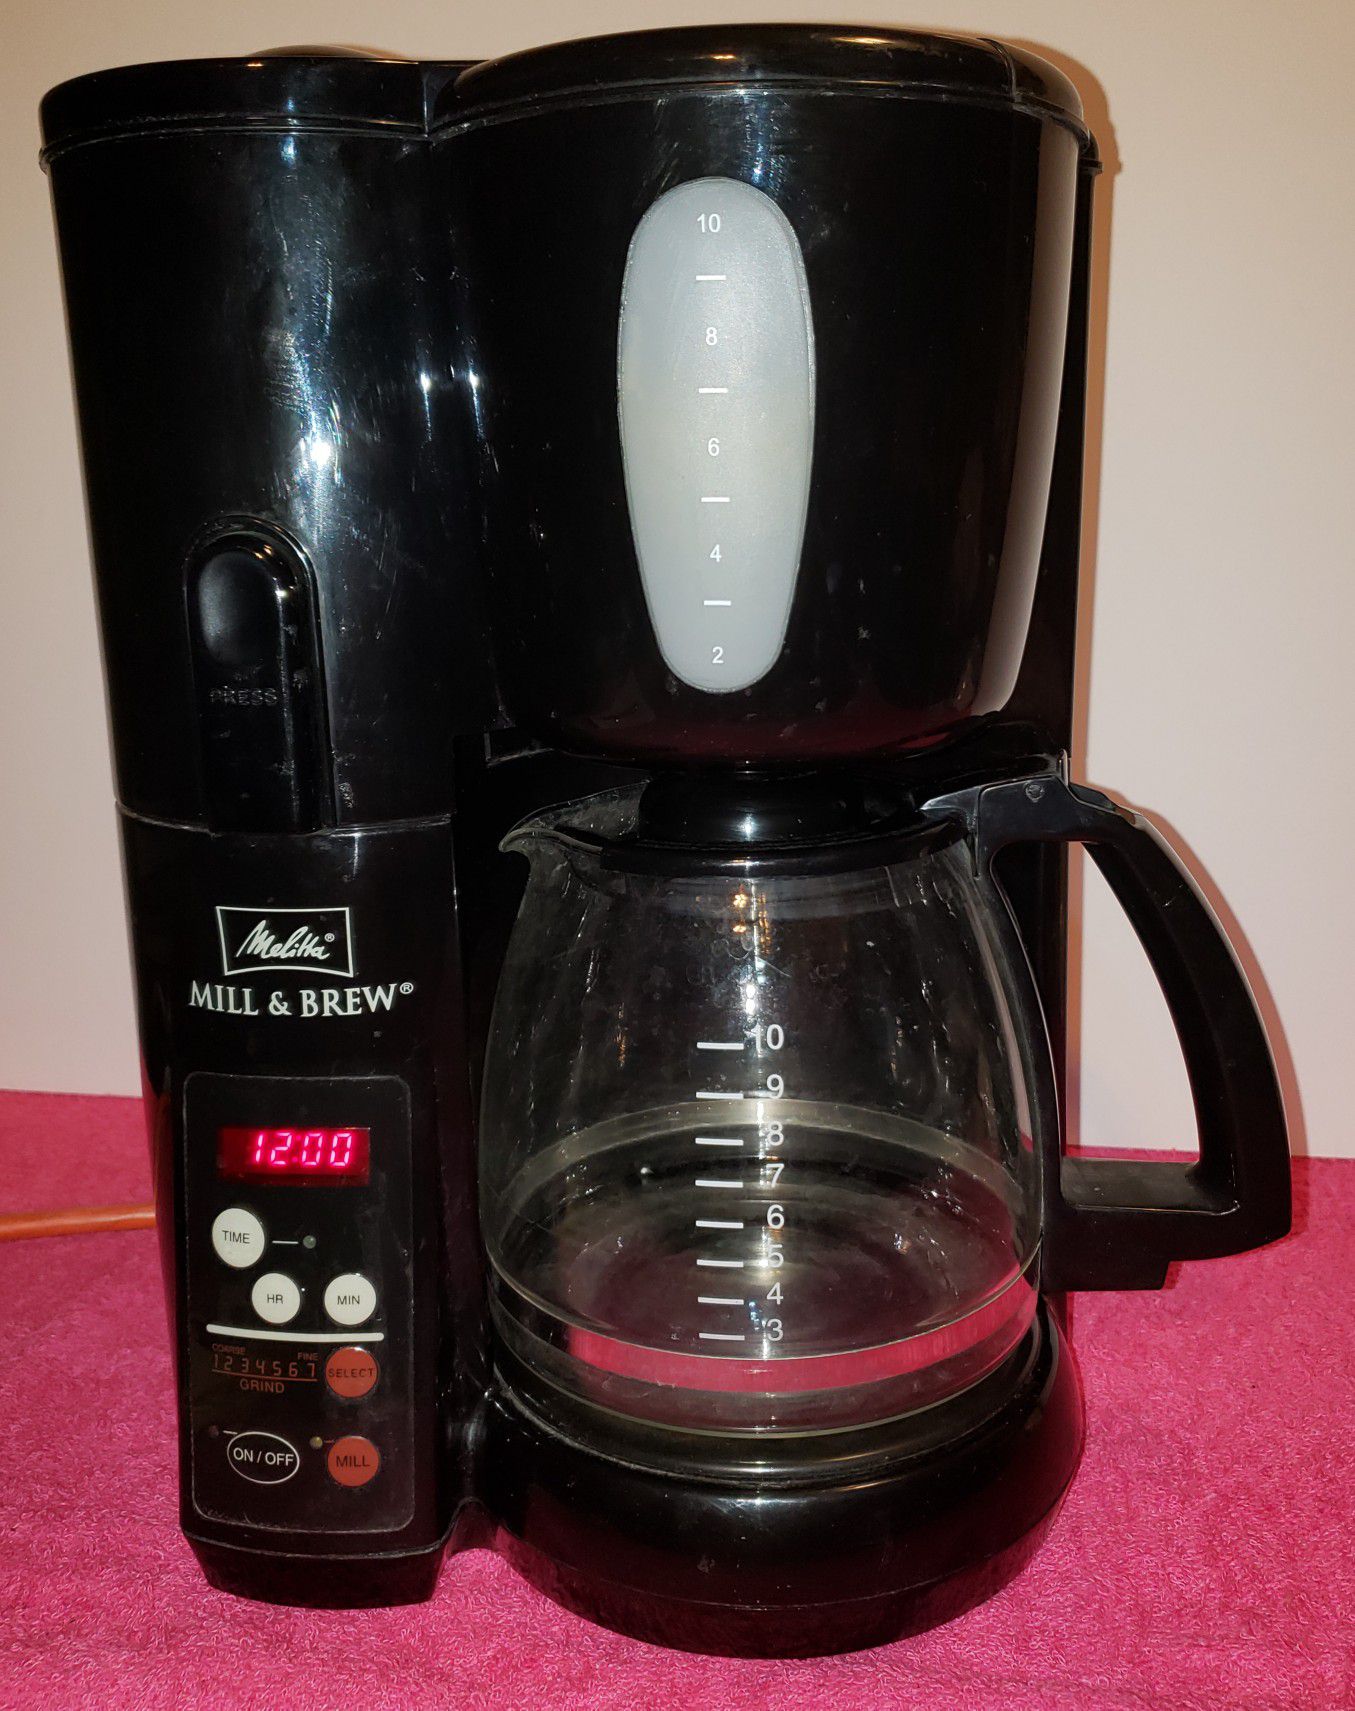 Melitta Mill & Brew 10 Cup Coffee Maker MEMB1 Black Used Works Perfectly